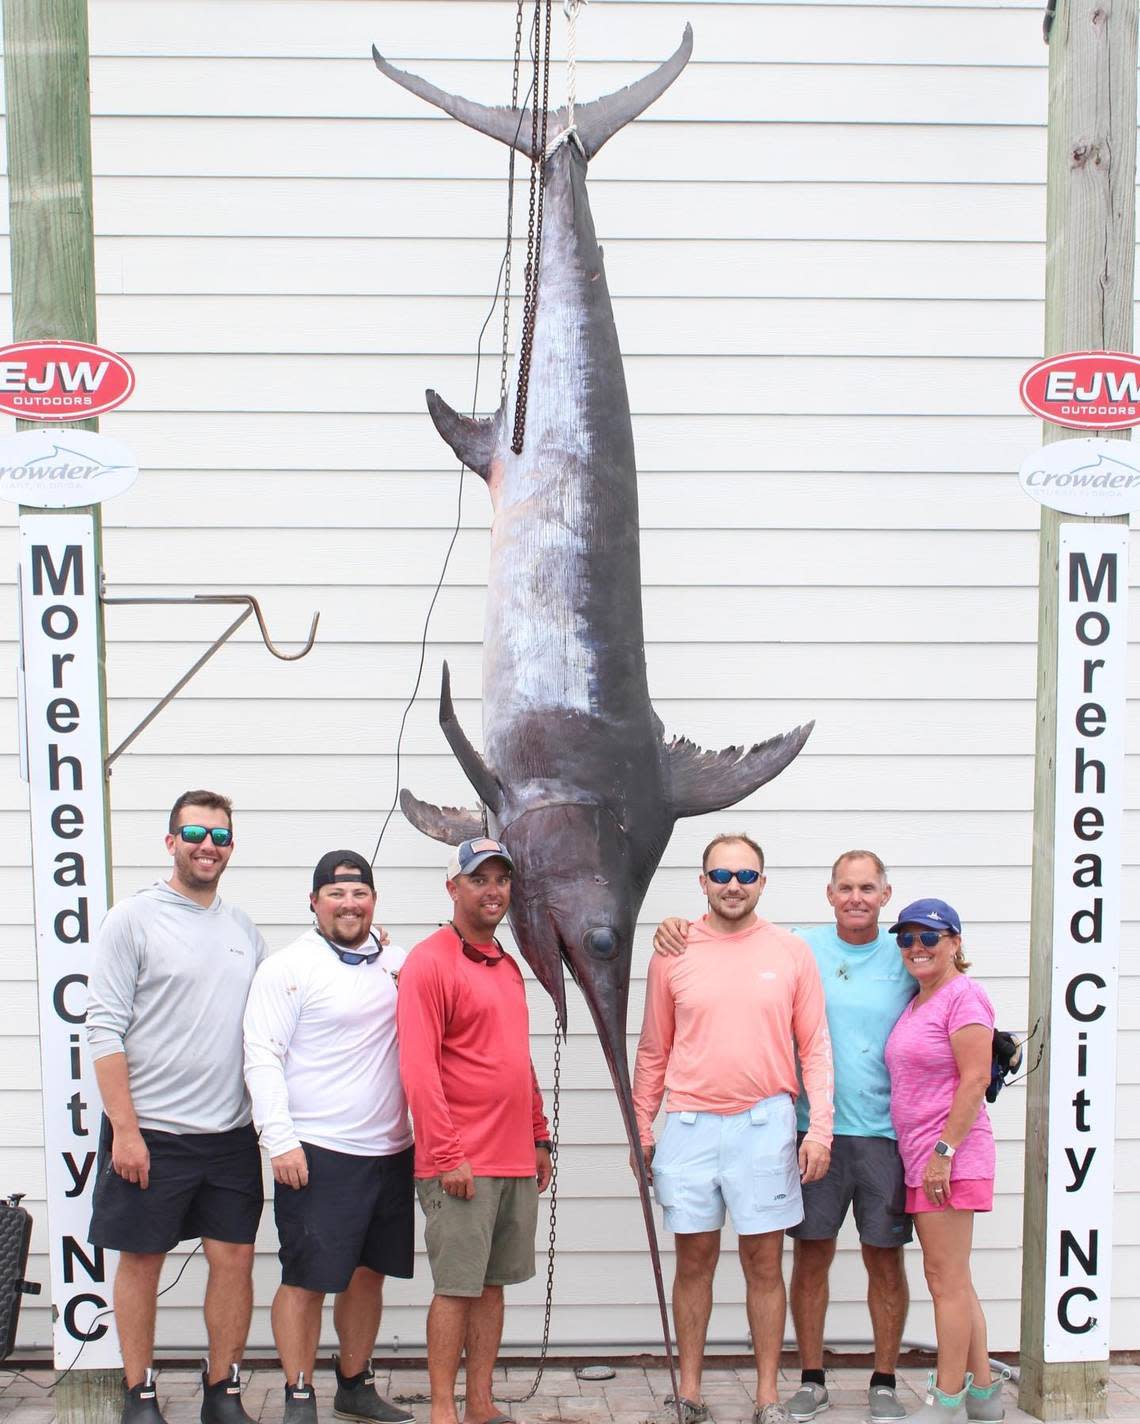 Cary Carney of Newport, NC, poses with the state-record swordfish he caught on his son Brandon Carney’s boat off Morehead City in August.